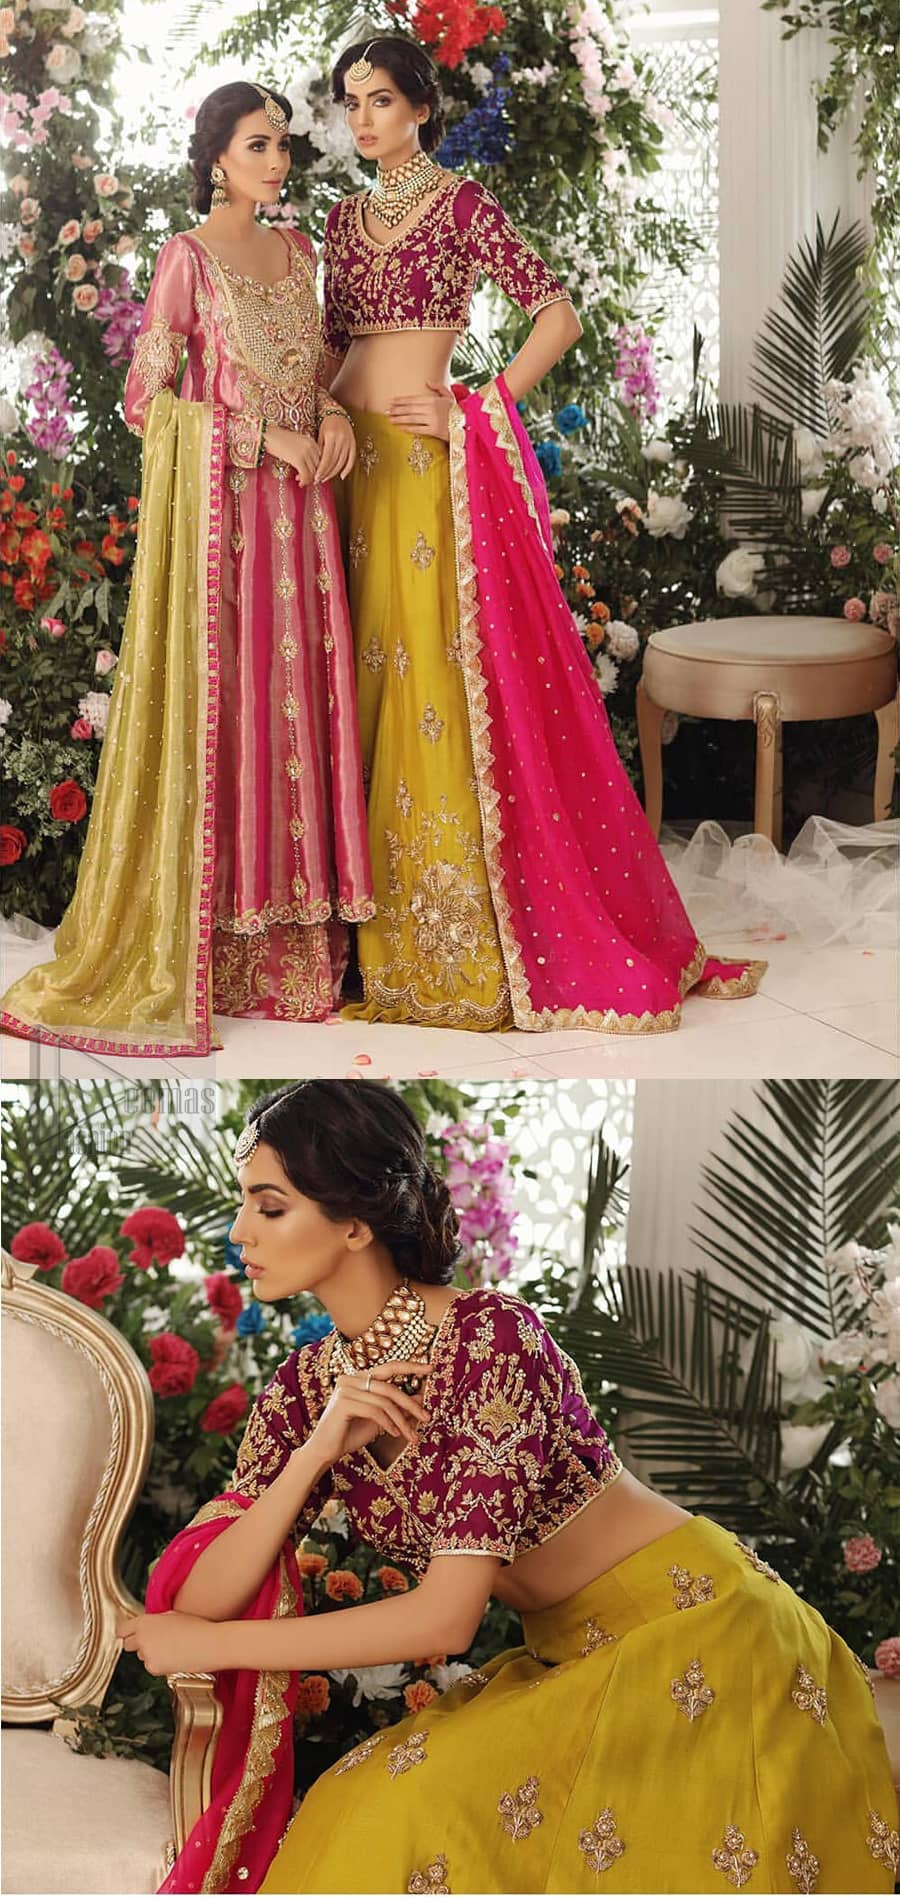 Adorn yourself with this breath-taking mehndi lehenga outfit. This beautiful mehndi dress comes with yellow lehenga with scattered beautiful embellished motifs and floral booties around a large central motif and it finished with frilled border. It is coordinated with a beautiful plum blouse adorned with zardozi work in the shades of golden and silver. Style it up with pink organza dupatta with sequins sprayed all over it along with gota finishing on all four sides.